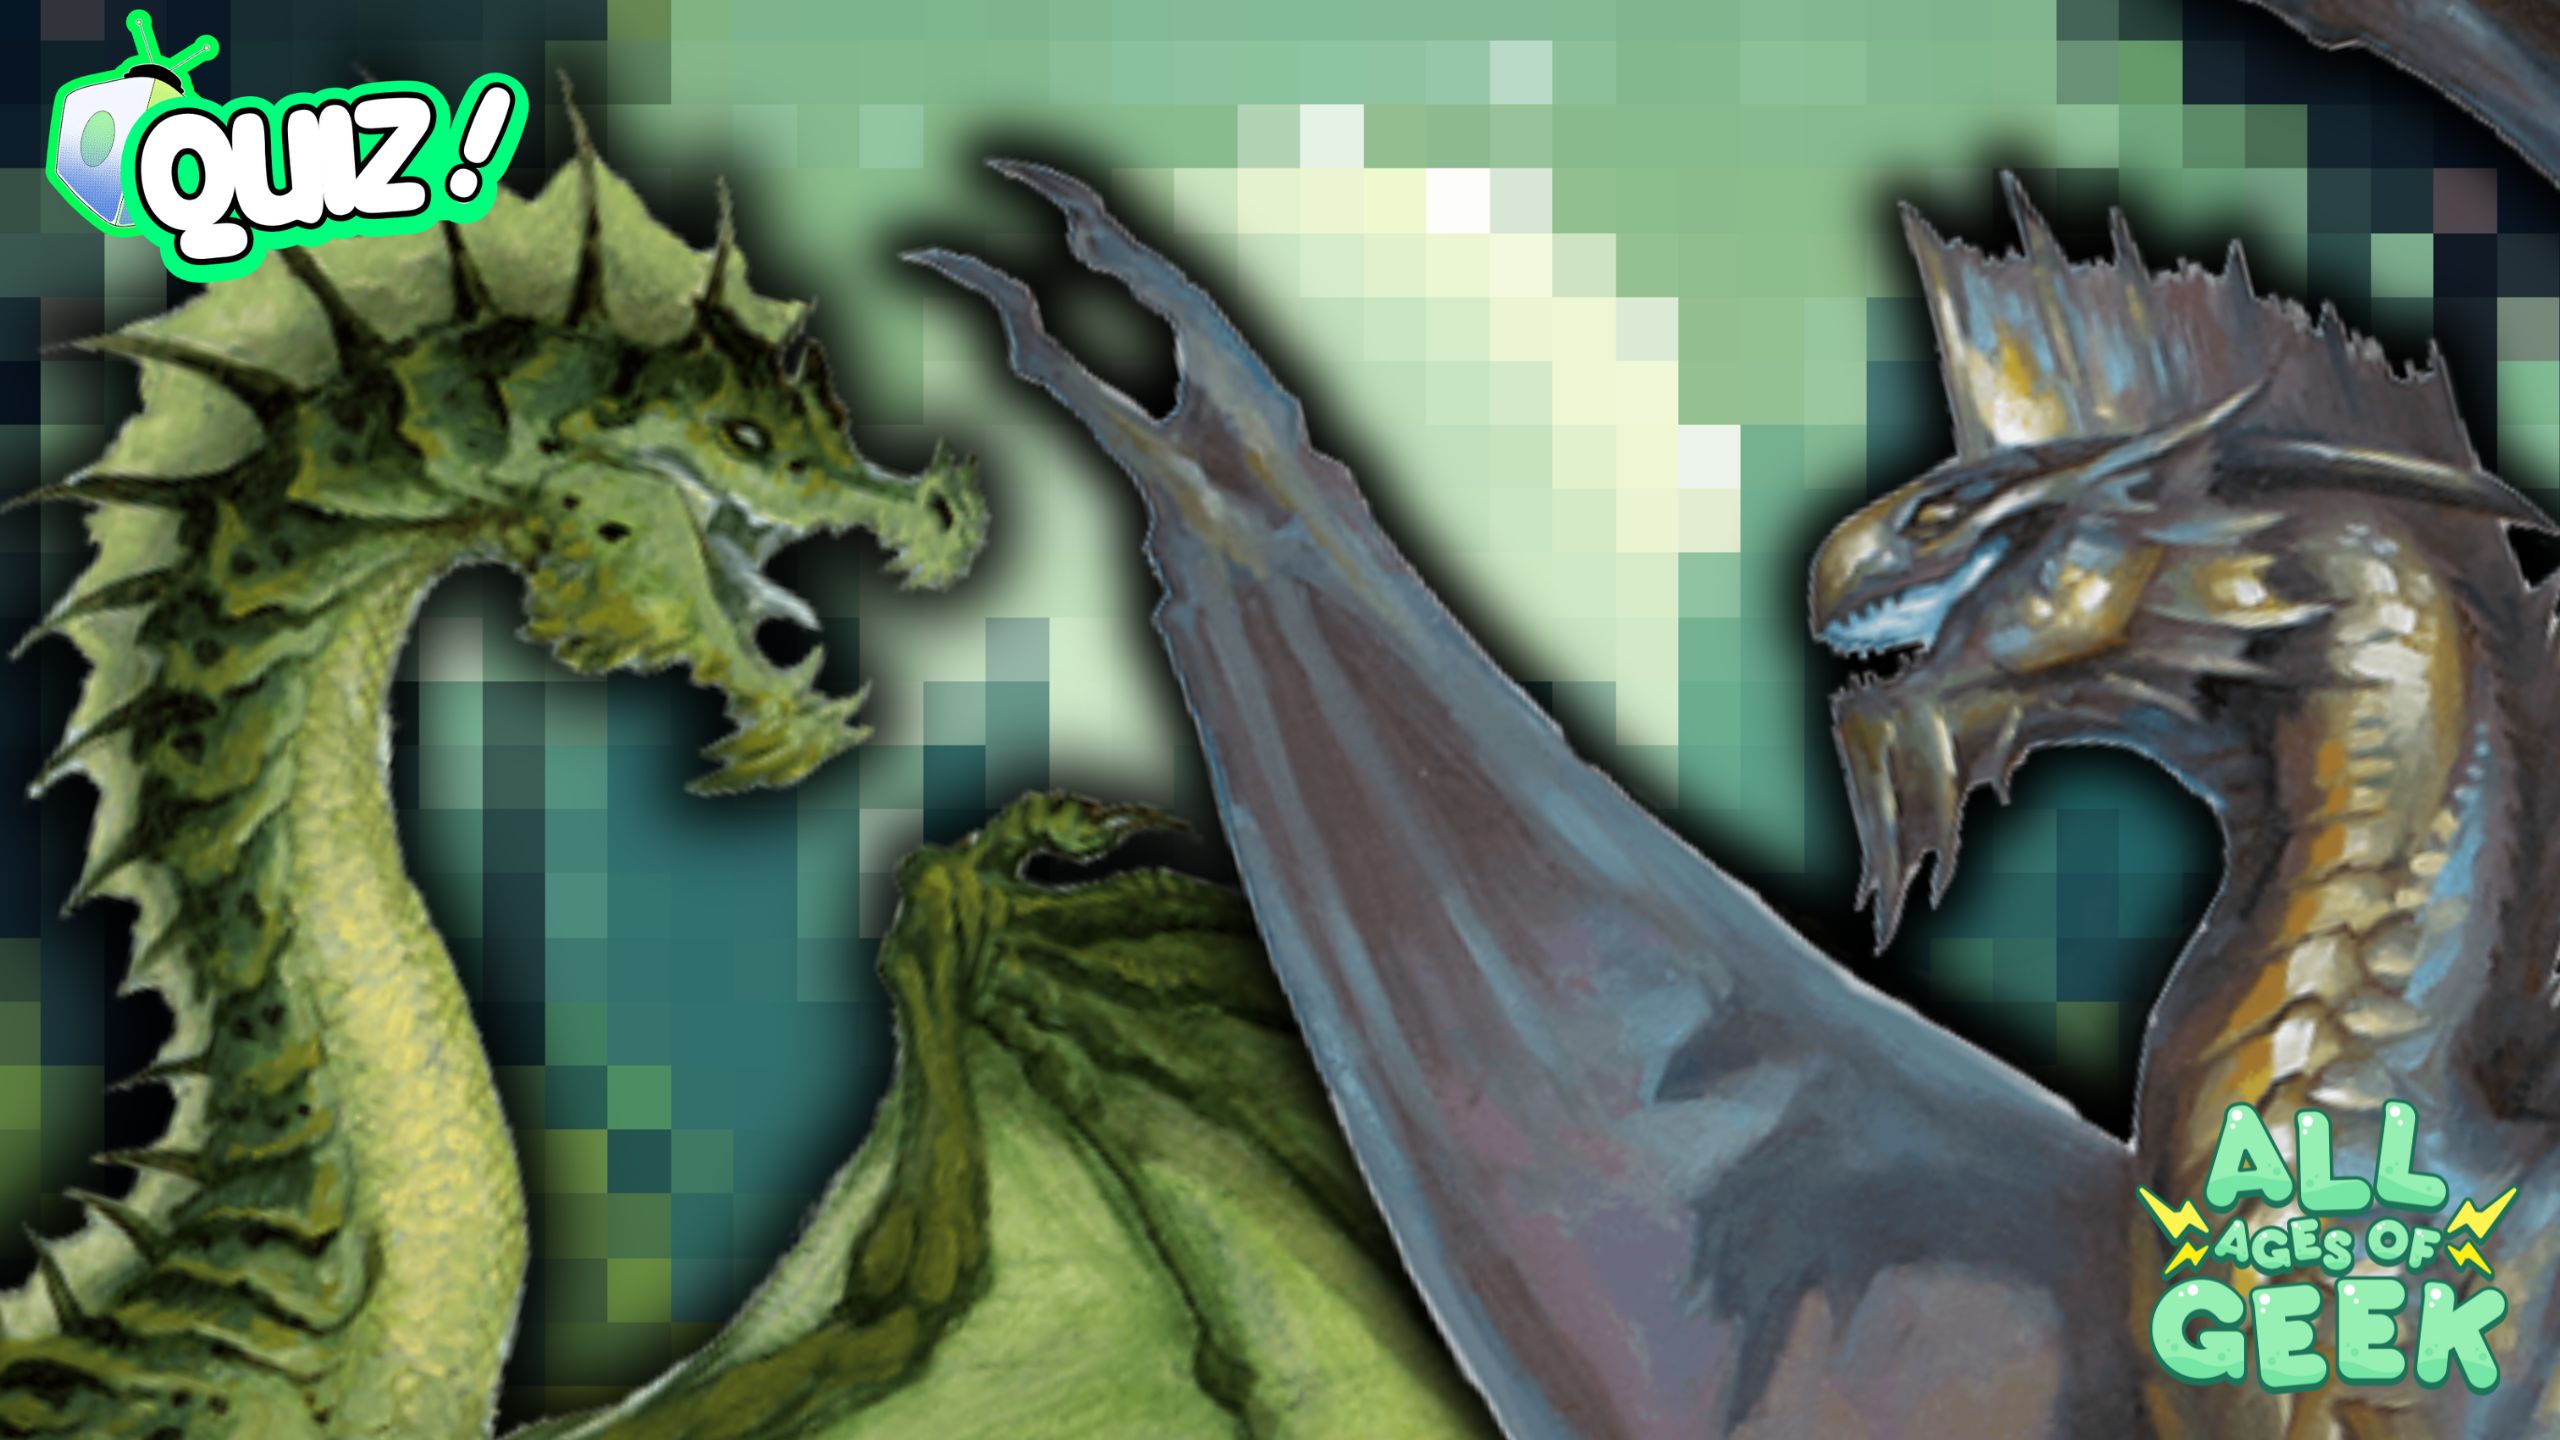 Which of the DnD Dragons Are You? Take the Quiz!